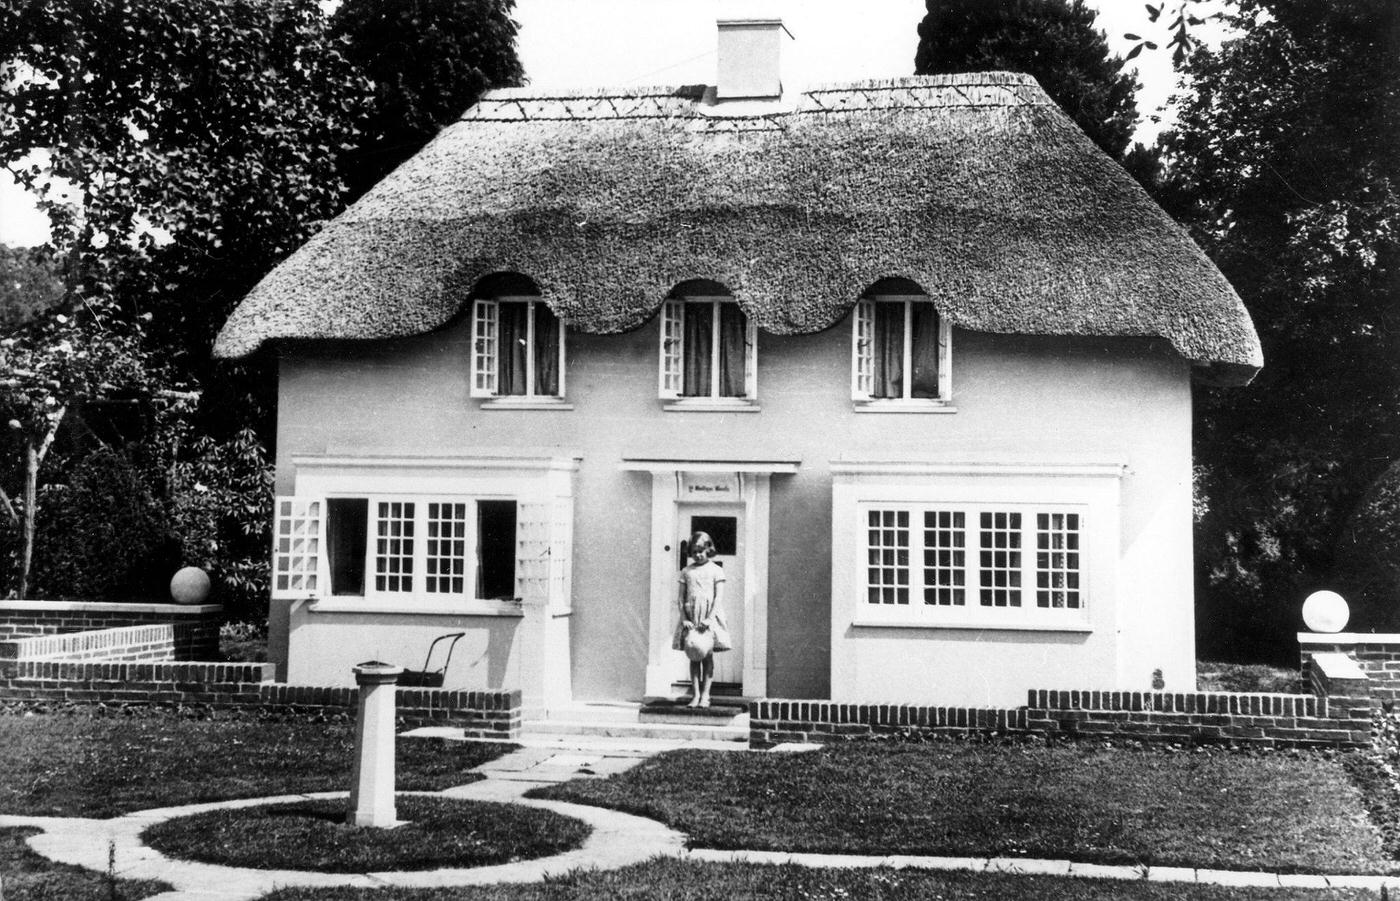 Queen Elizabeth II as a Seven-Year-Old in Front of Miniature House, 1933